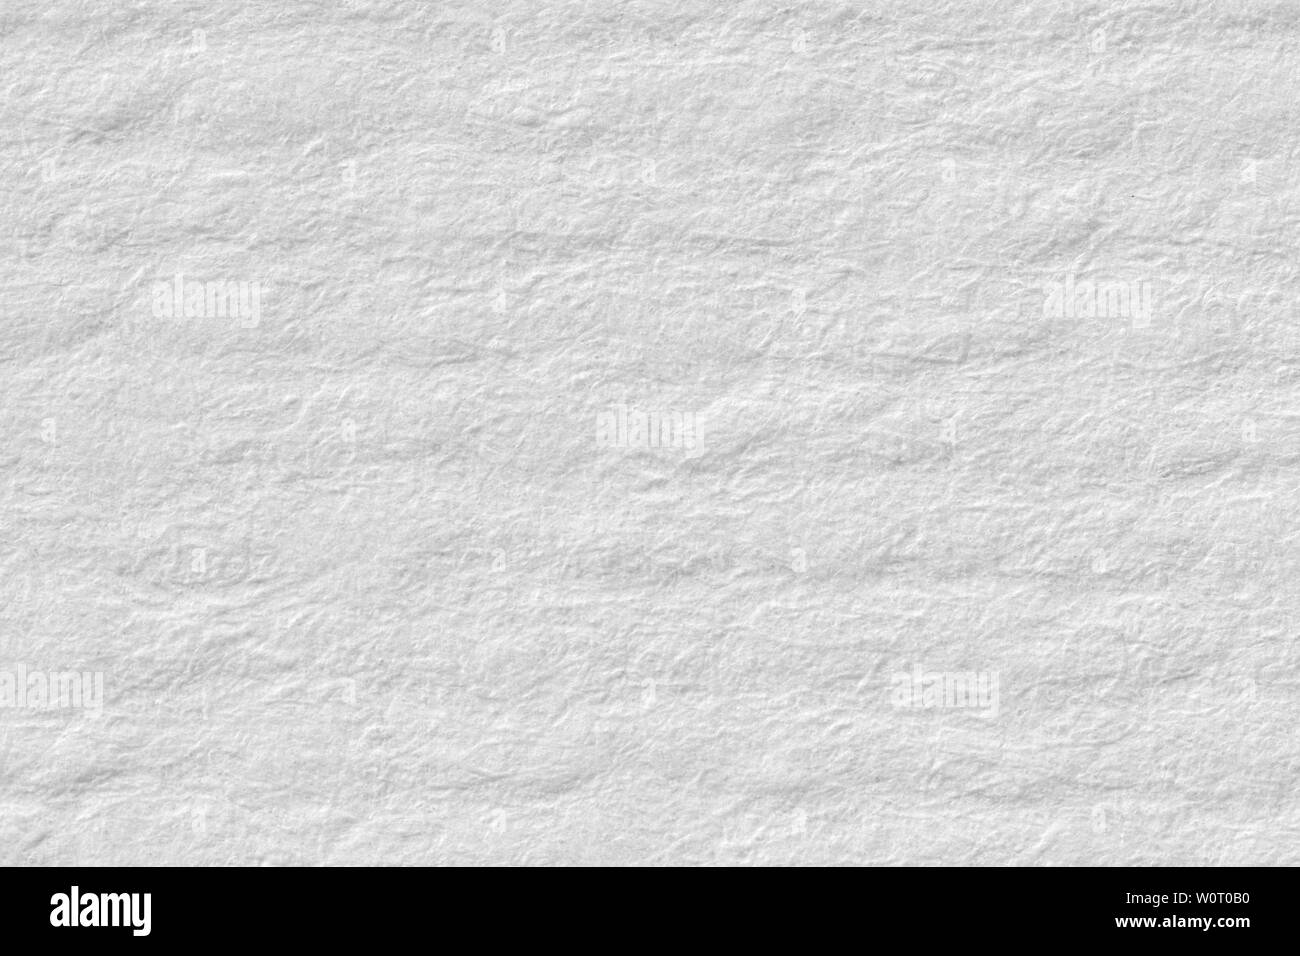 A rough texture background of white watercolour paper. High resolution photo. Stock Photo